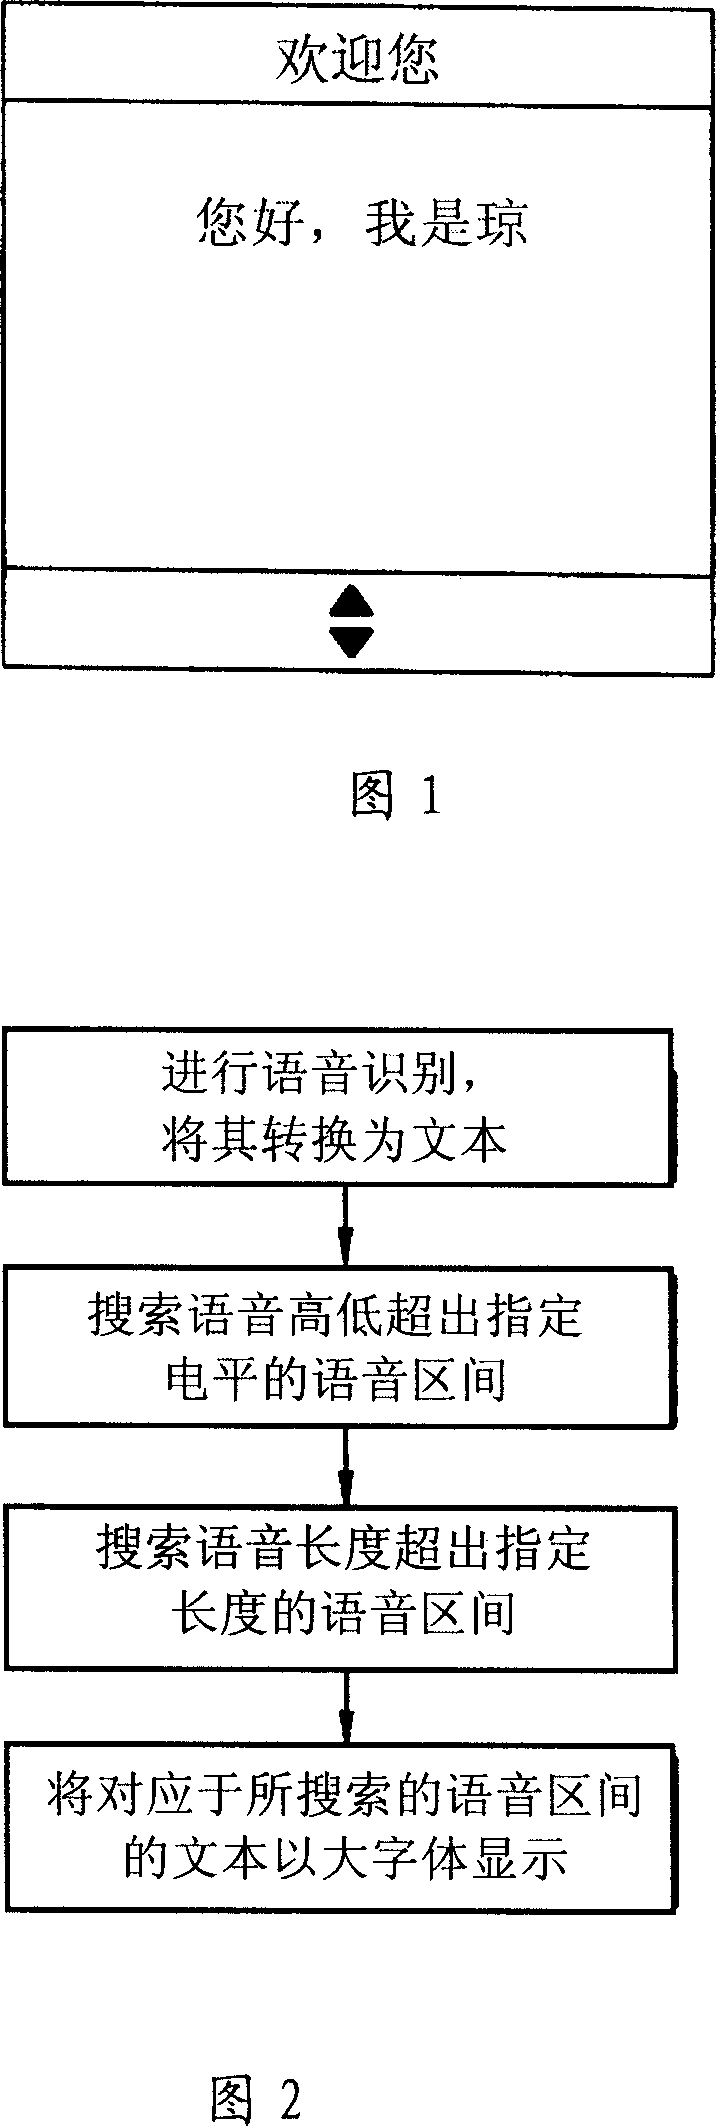 Text representing method of voice/text conversion technology